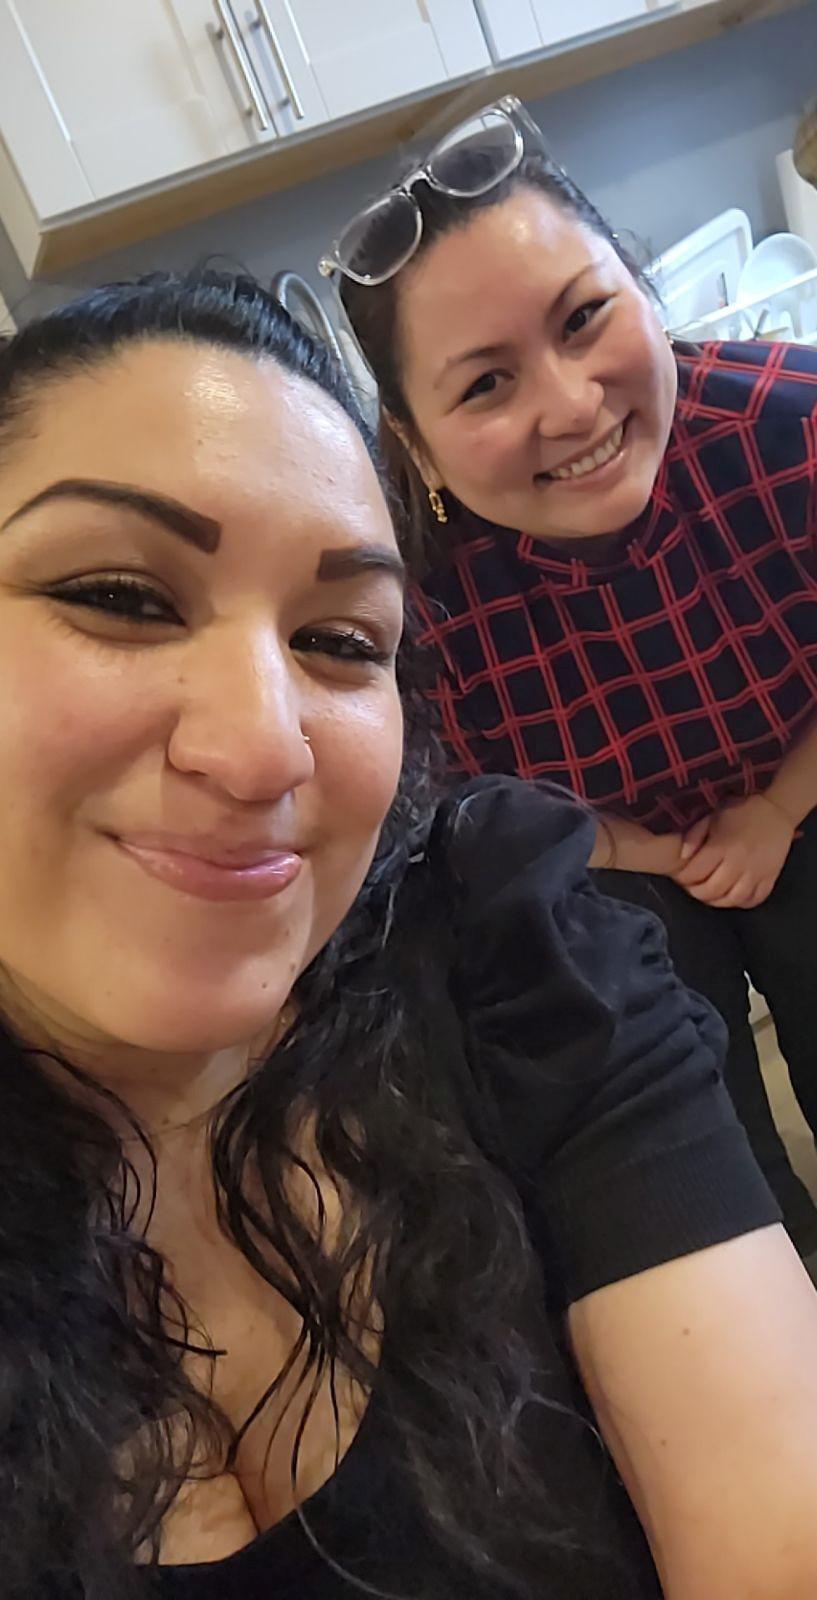 BREAKFAST WEDNESDAY!!! Here at Joe Yi State Farm, we have weekly breakfast meetings. It is one of the fun ways I like to keep my staff happy! Here are some selfies from today's meeting!